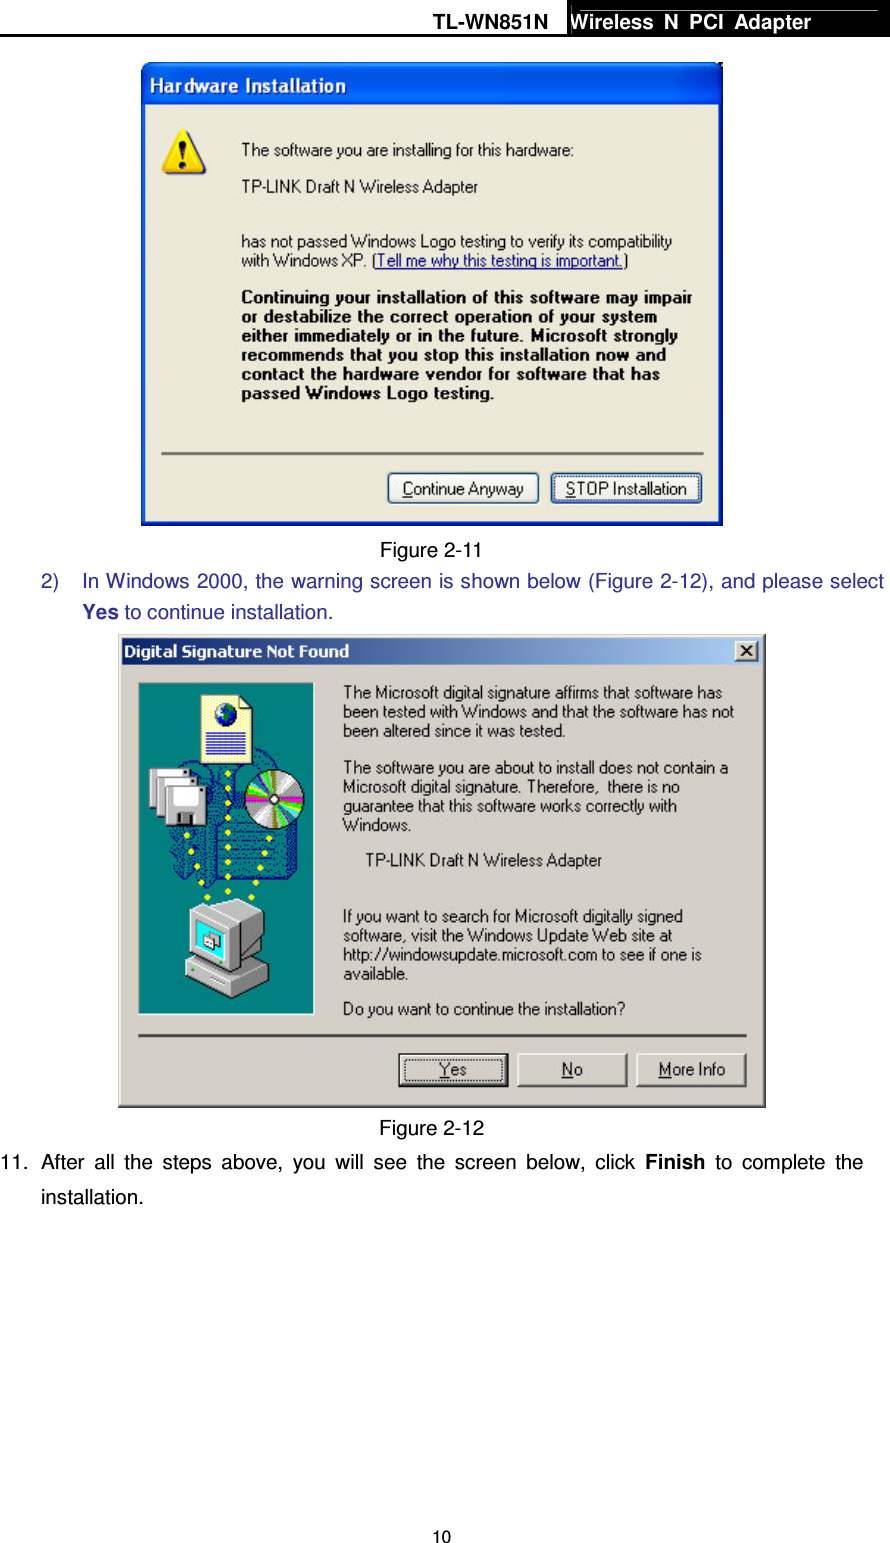 TL-WN851N Wireless  N  PCI  Adapter   10 Figure 2-11 2)  In Windows 2000, the warning screen is shown below (Figure 2-12), and please select Yes to continue installation.  Figure 2-12 11.  After  all  the  steps  above,  you  will  see  the  screen  below,  click  Finish  to  complete  the installation. 